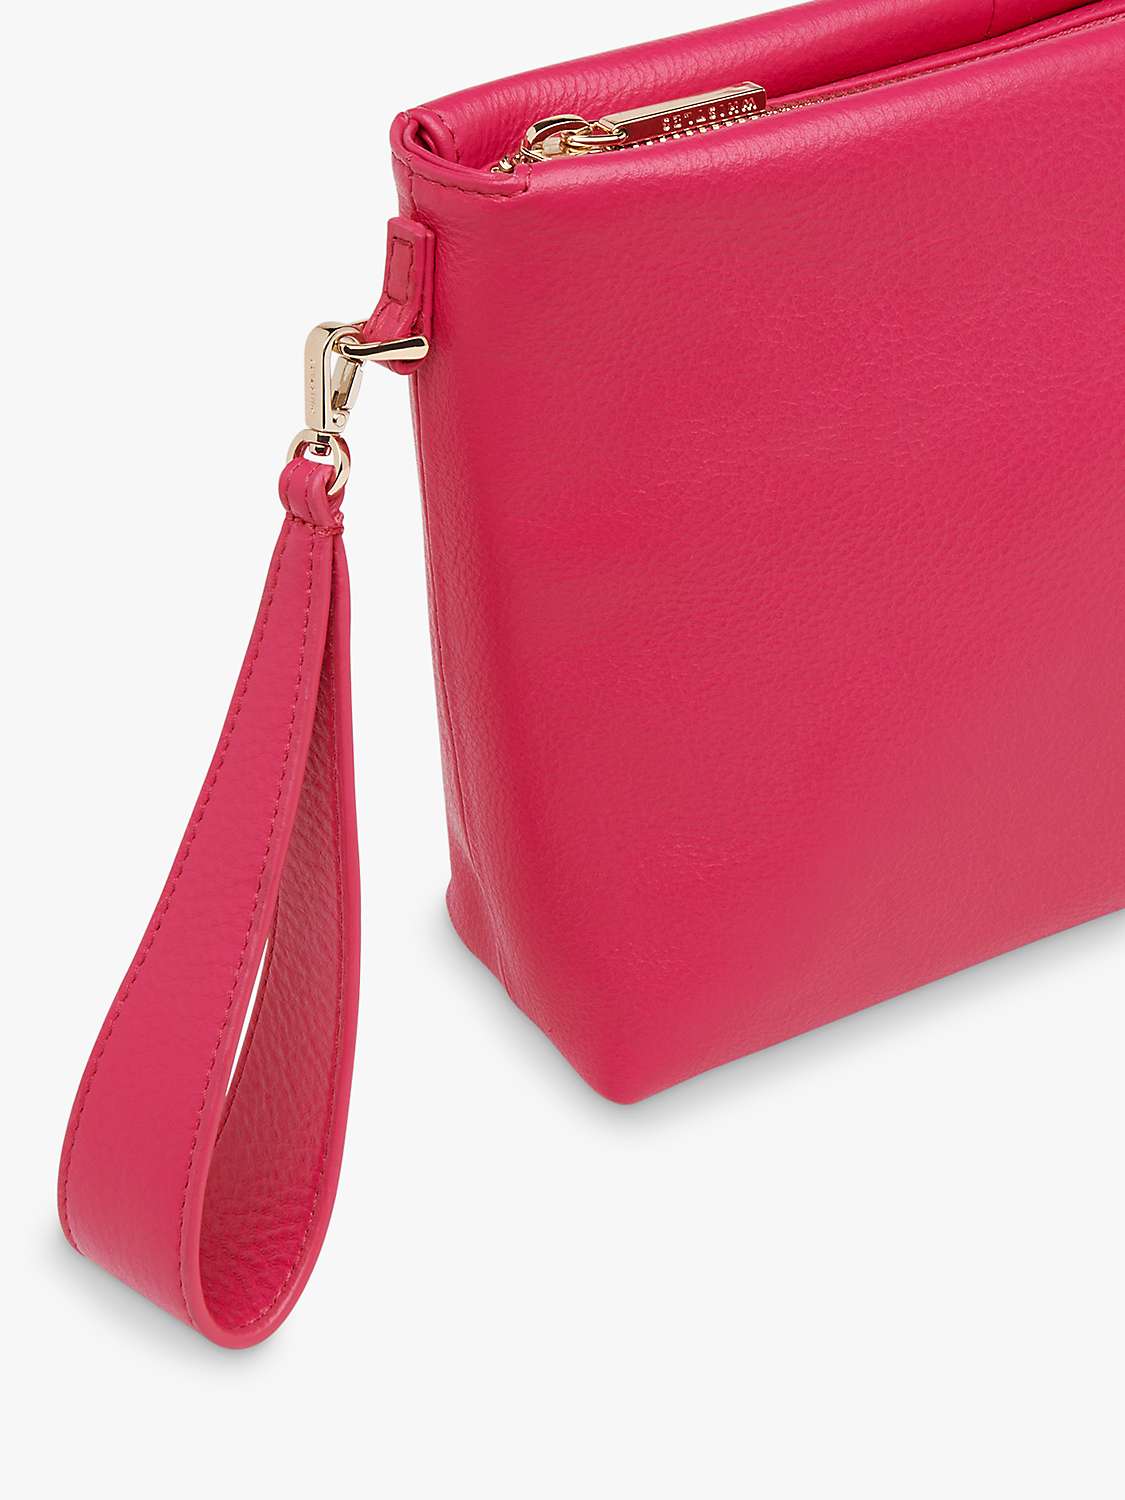 Buy Whistles Avah Zip Top Leather Clutch Bag Online at johnlewis.com